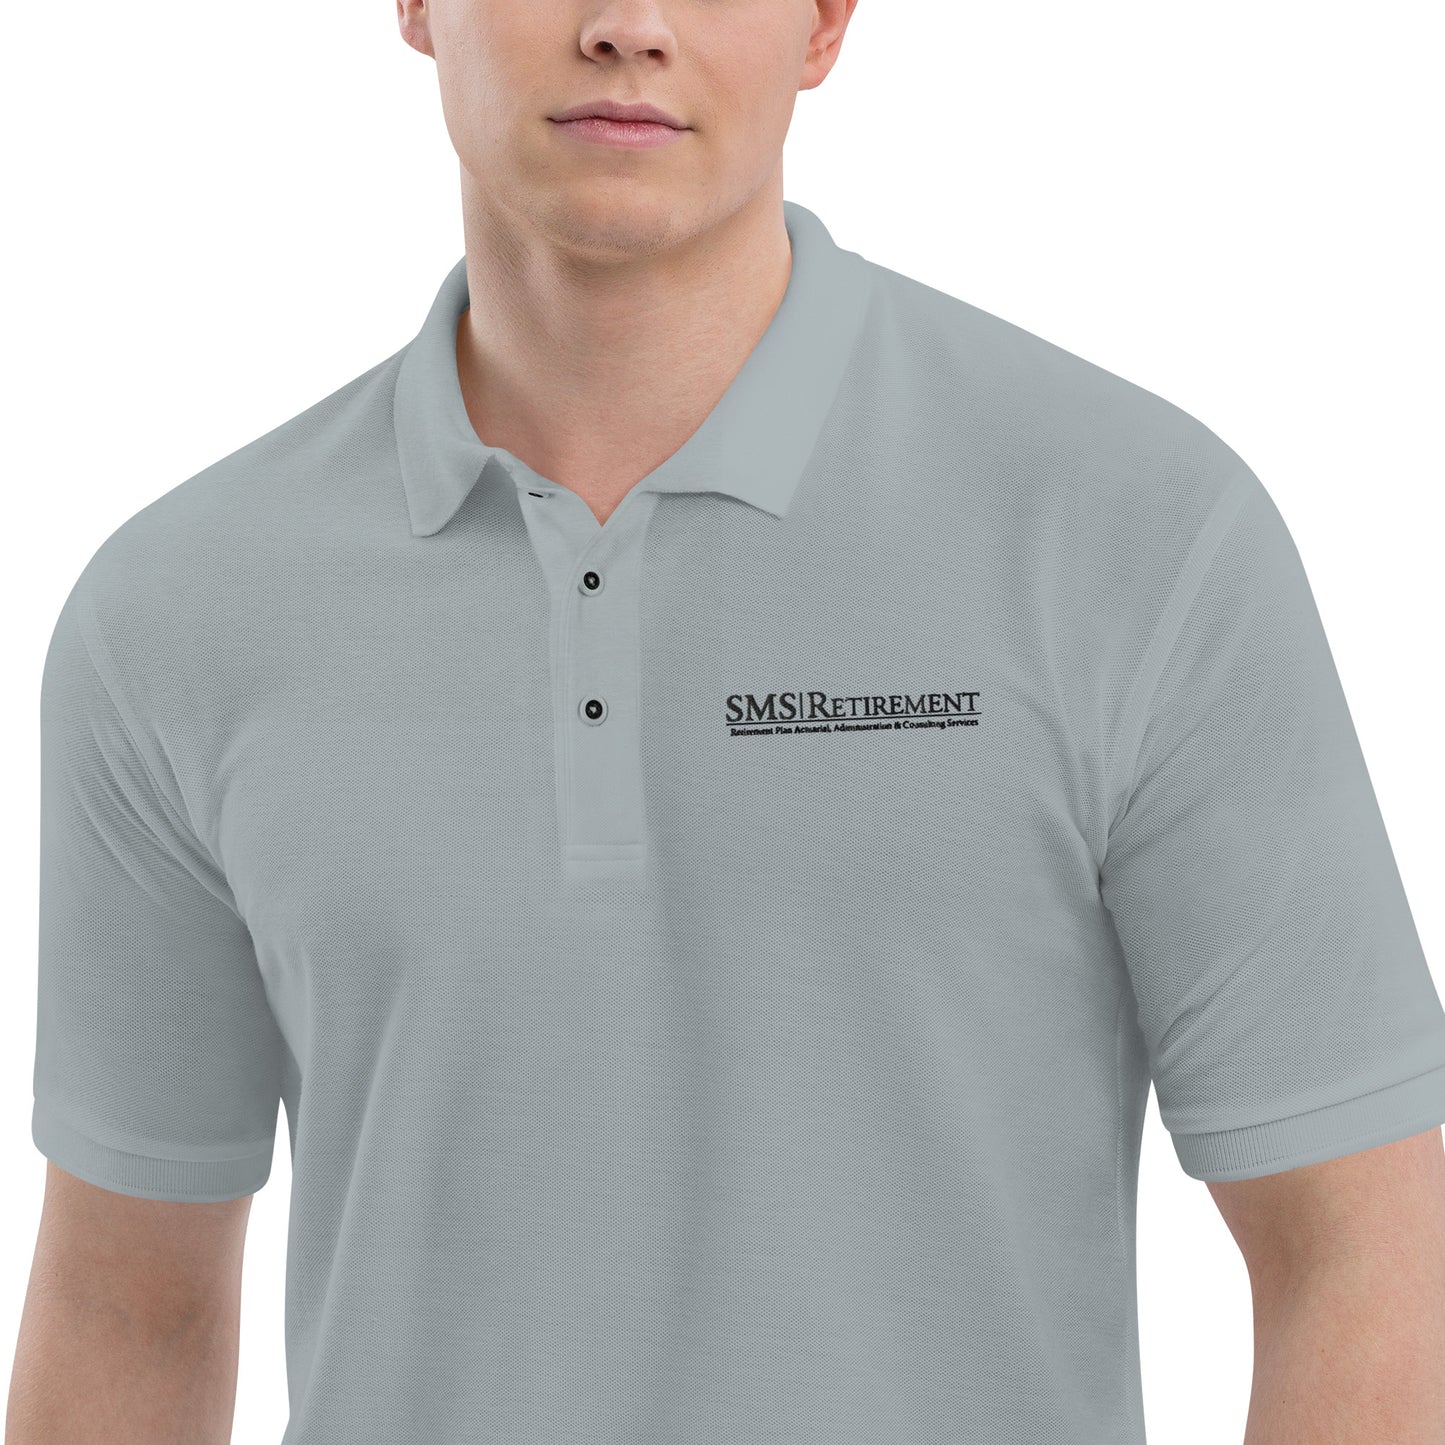 SMS Retirement Polo